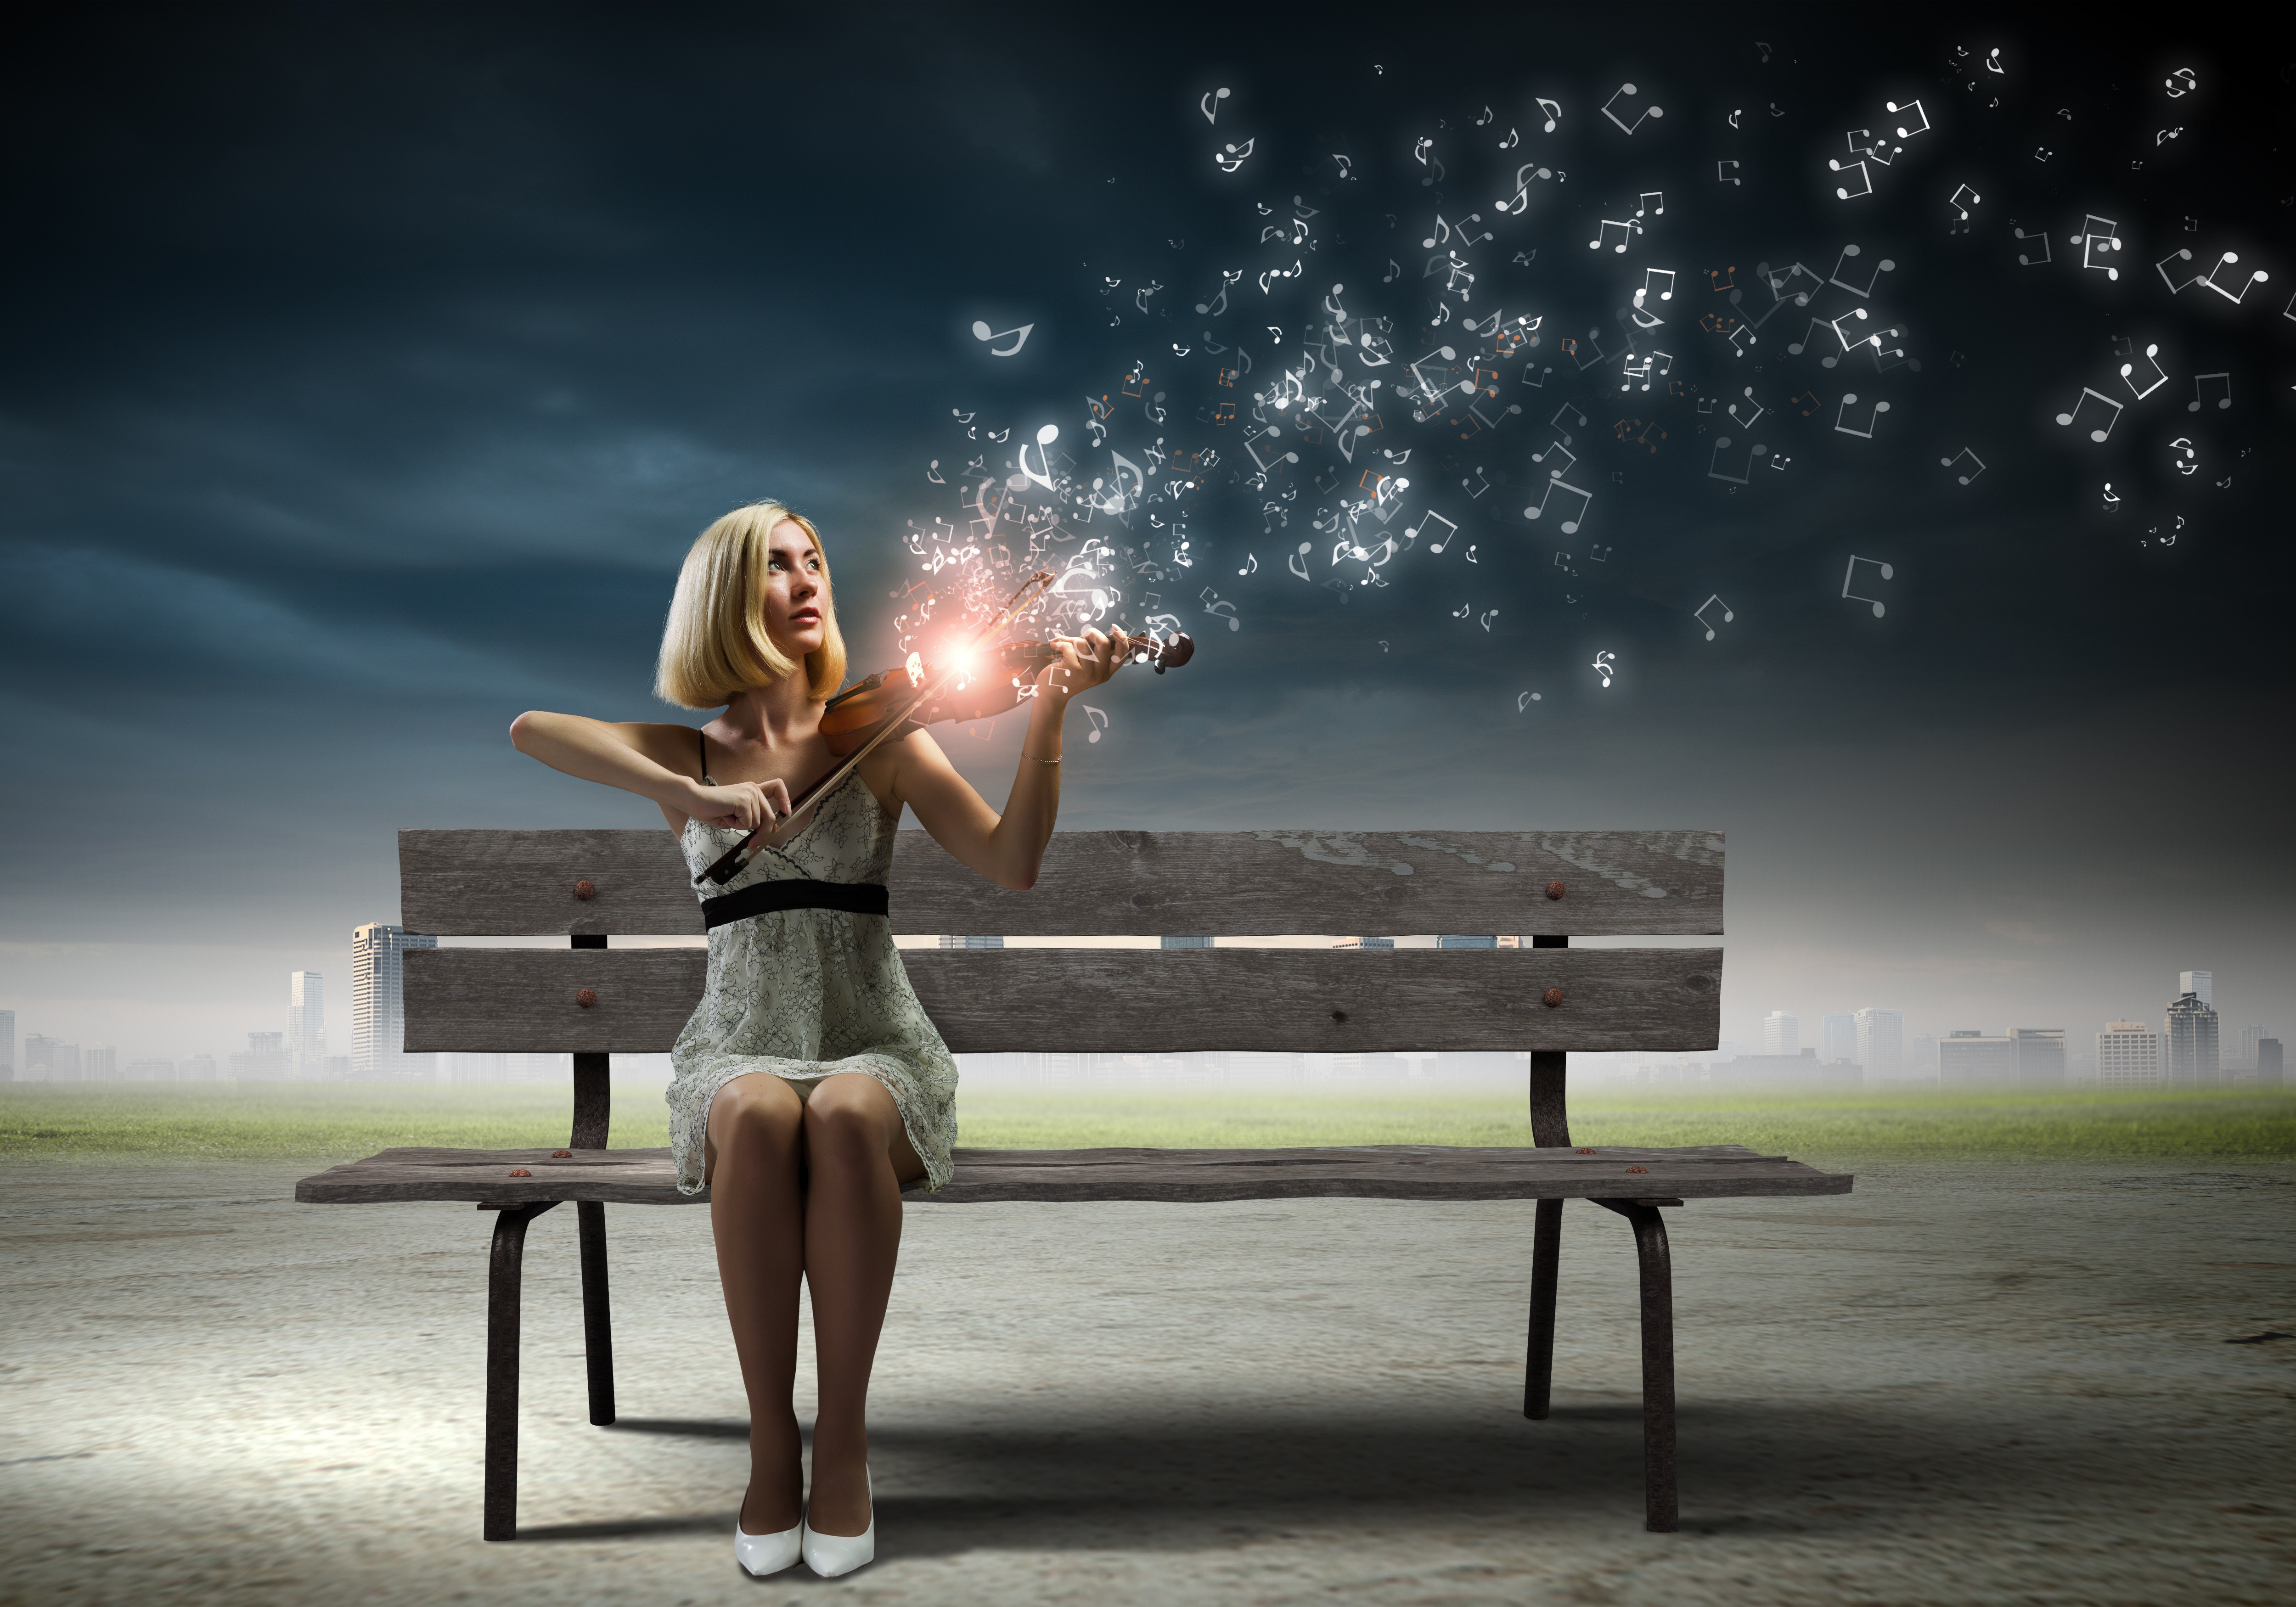 People 5000x3500 women model blonde long hair photo manipulation digital art minidress sitting bench playing violin musician music clouds lights cityscape women outdoors musical instrument legs together musical notes